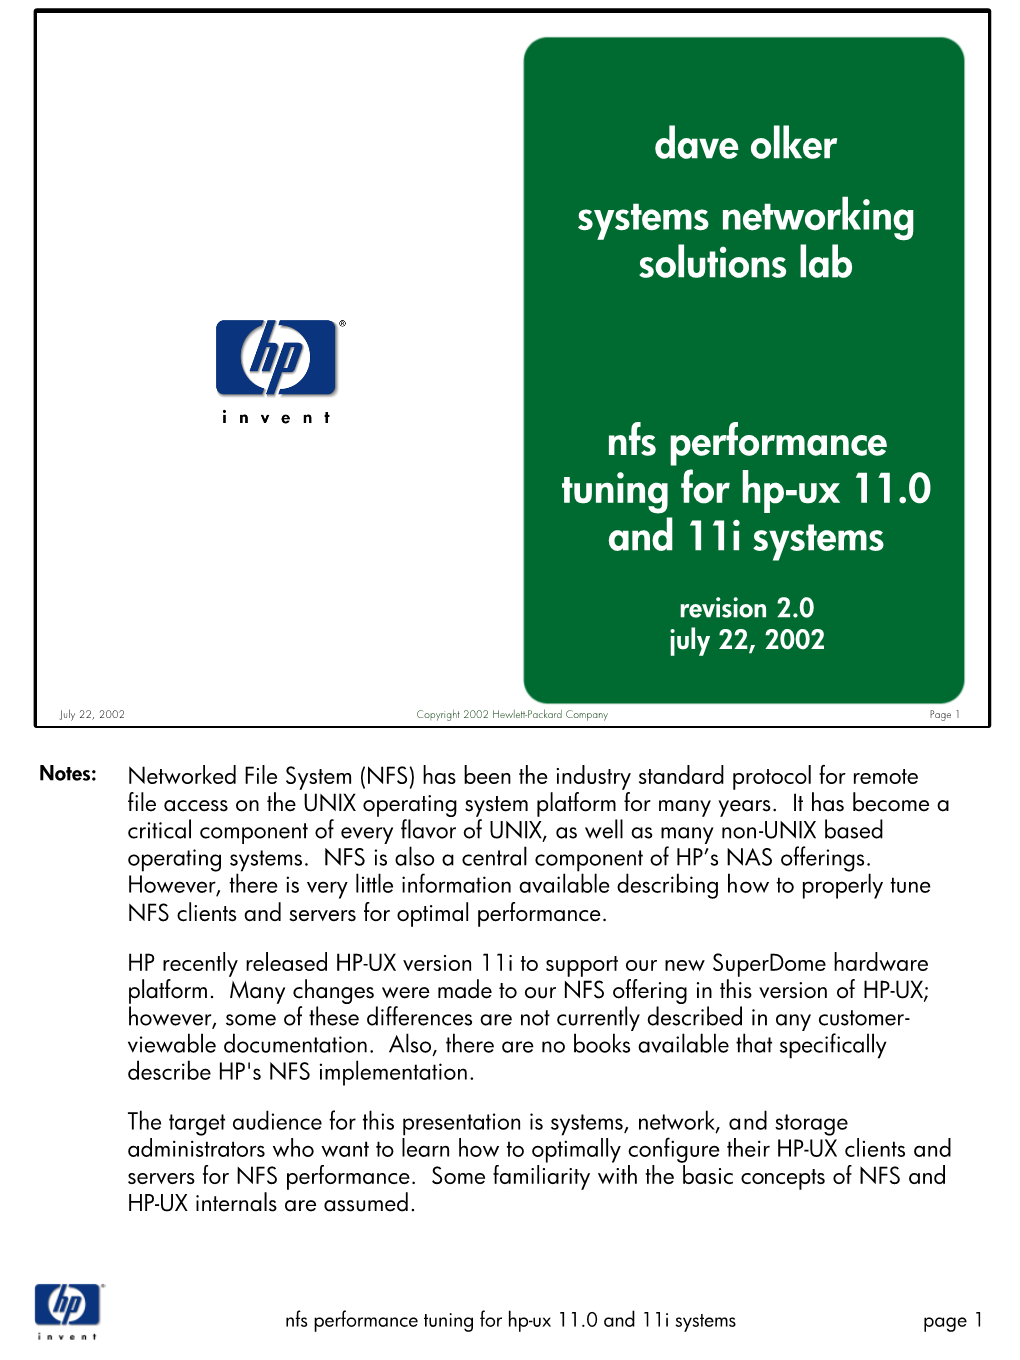 NFS Performance Tuning in HP-UX 11.0 and 11I Systems